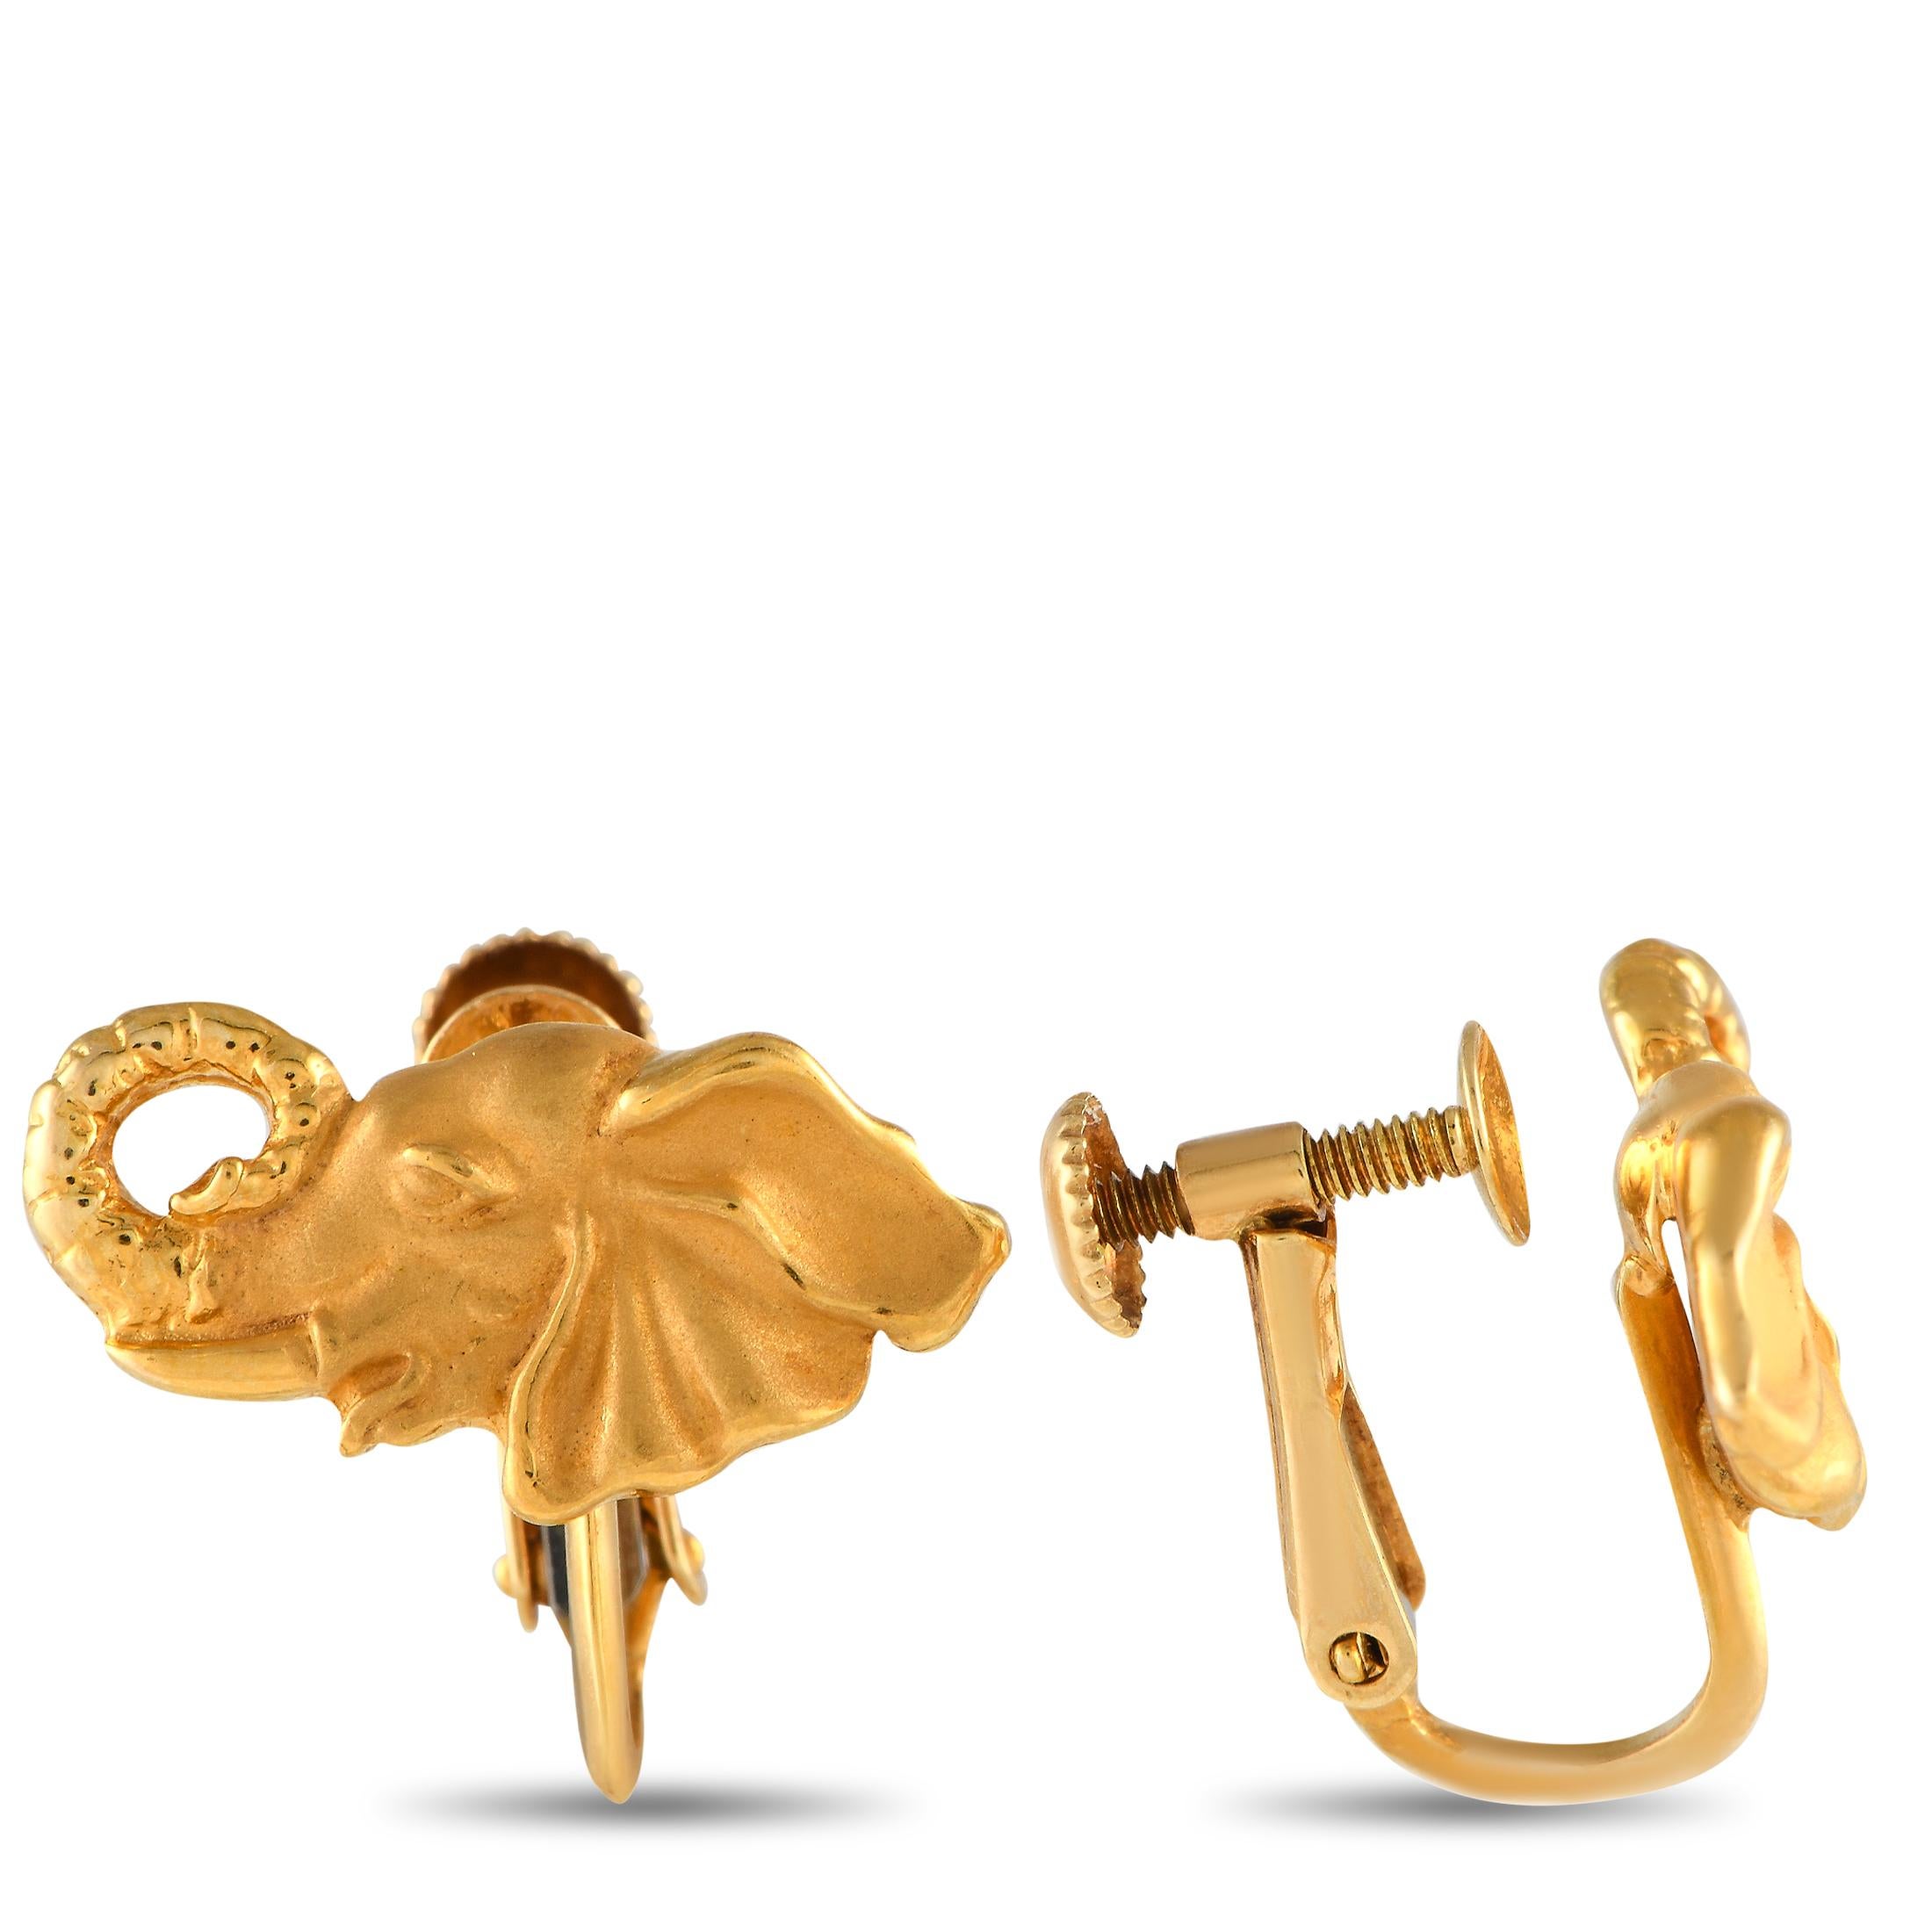 These Carrera y Carrera earrings are steeped in old world elegance. Crafted from opulent 18K yellow gold, each one features an intricate elephant motif design. Each earring measures 0.65” long, 0.50” wide, and is secured to the ear with a screw-back